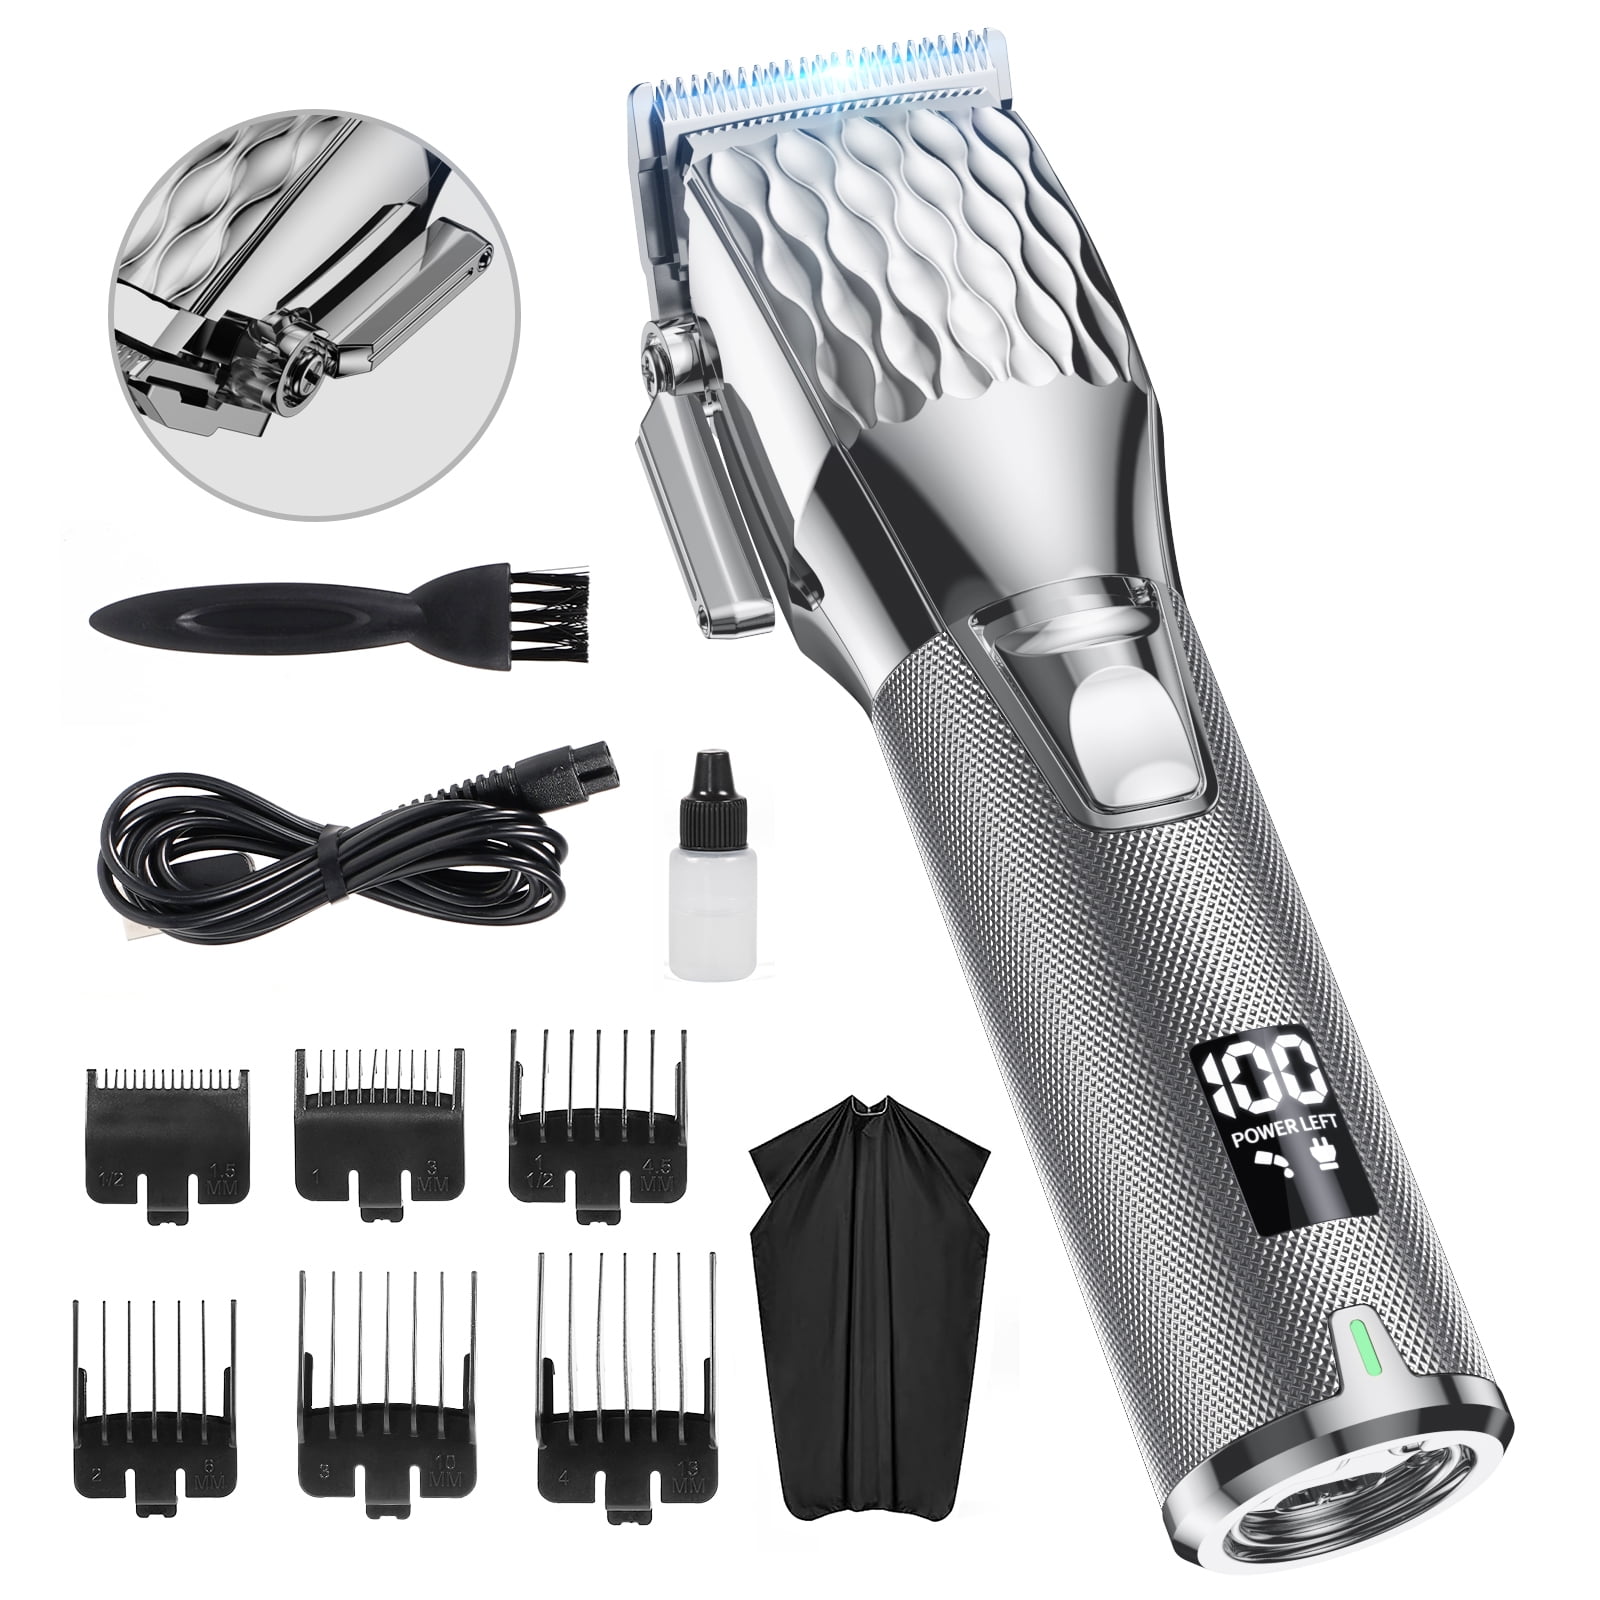 ADANTI Hair Clippers for Men, Hair Cutting Machine Professional Hair Clipper Adjustable Hair Trimmer Electric Haircut Rechargeable Clippers for Men